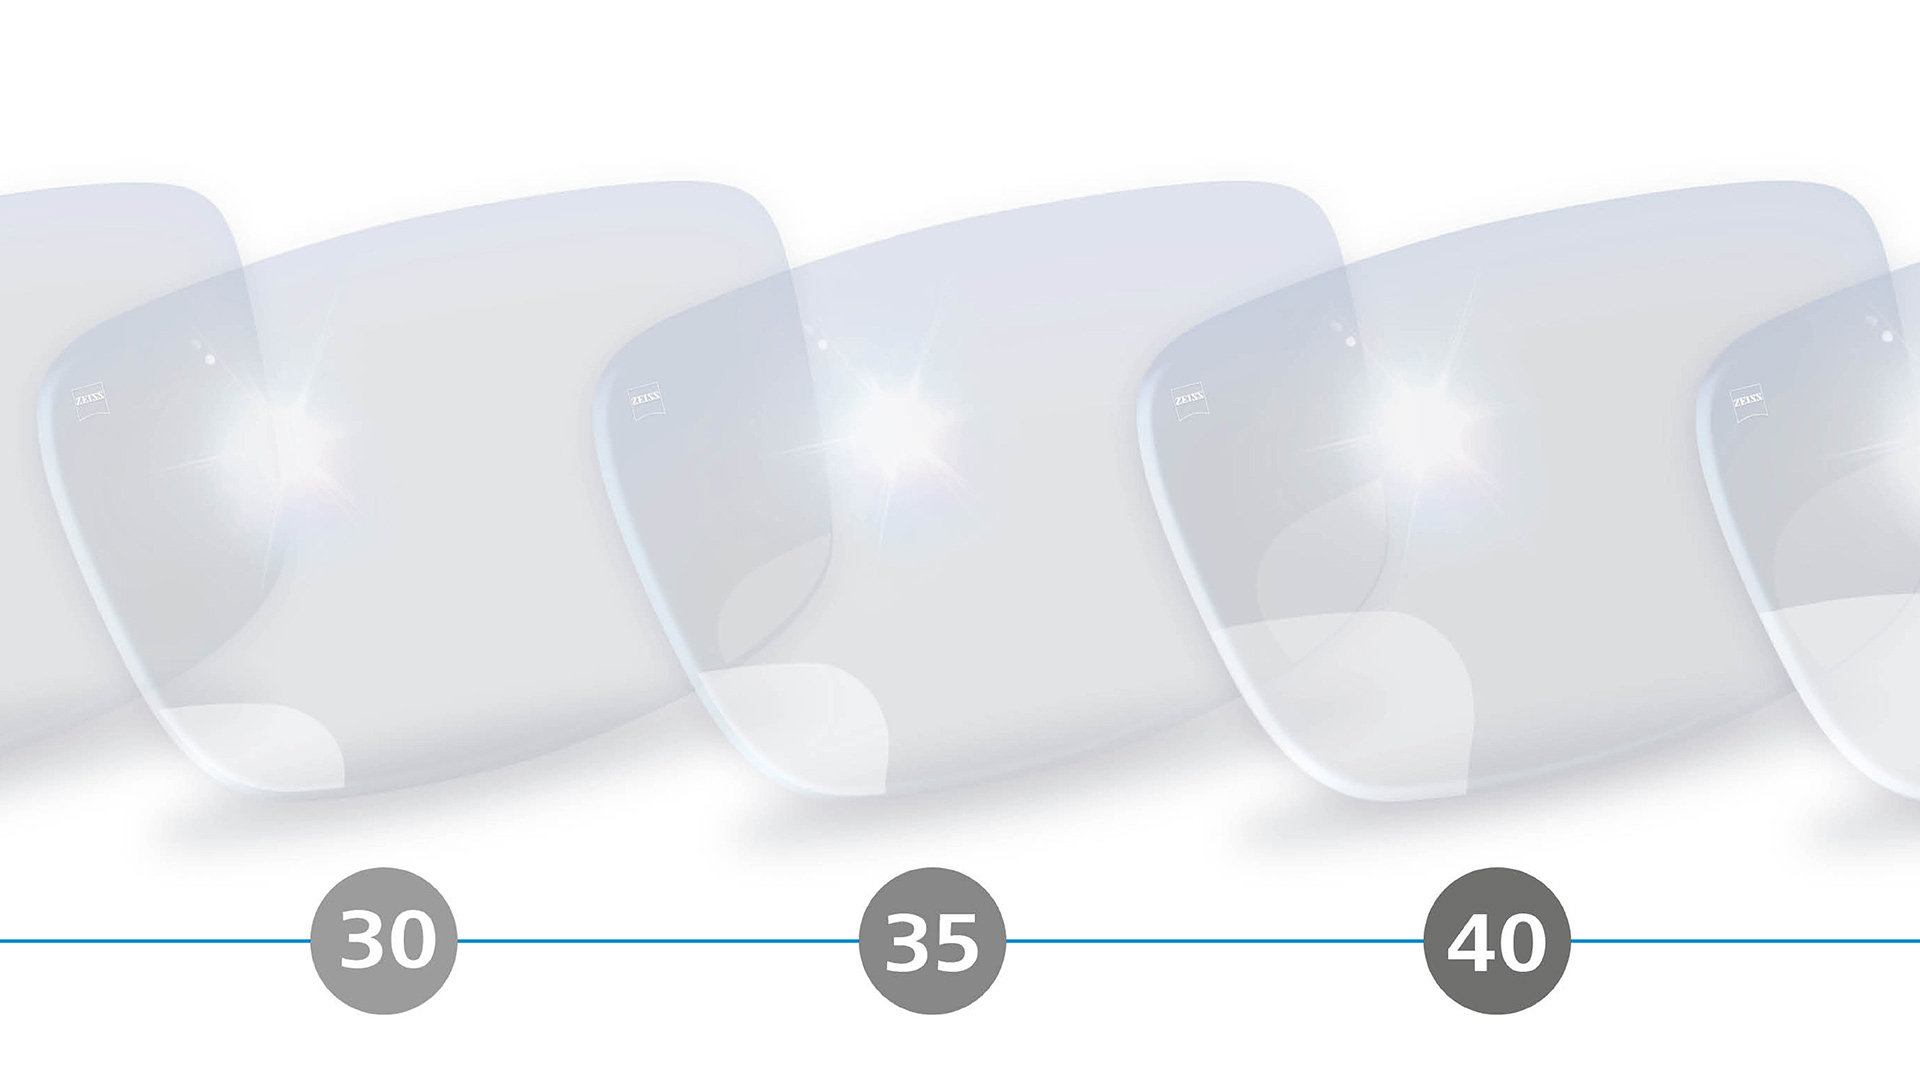 3D illustration of digital and progressive lenses with peripheral blurr zones for the ages 30 to 40 years.